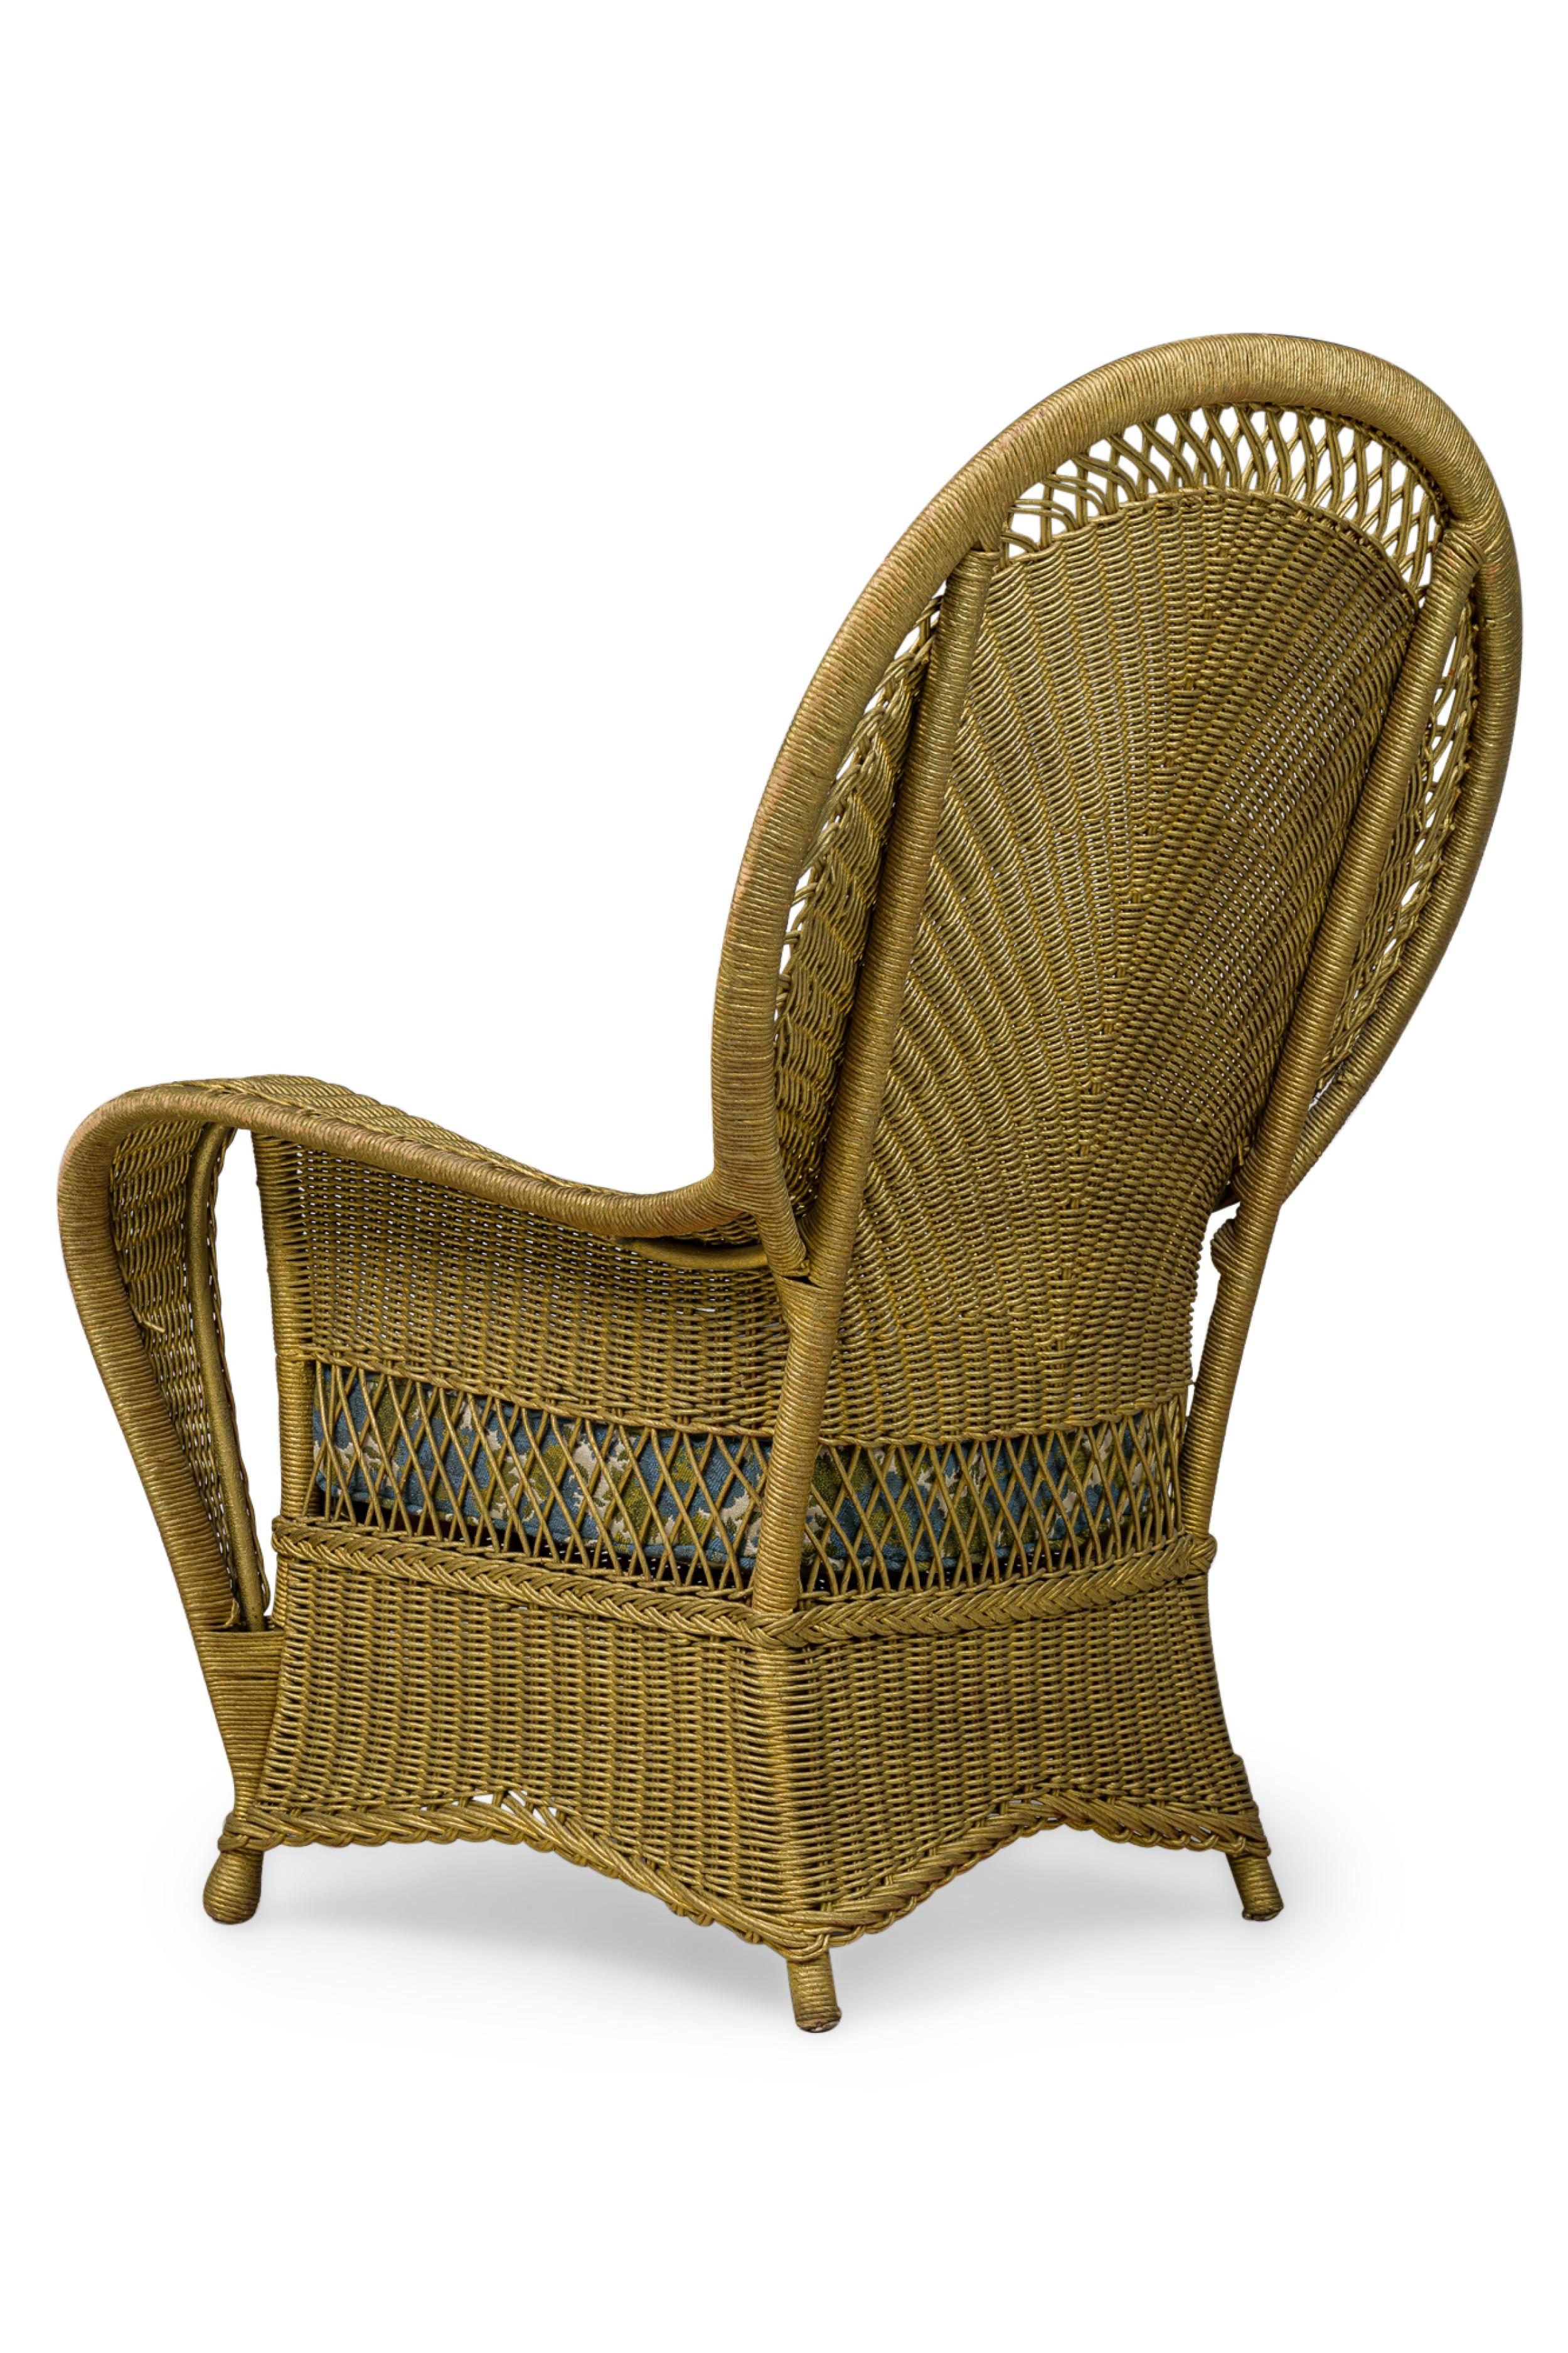 Pair of Similar Art Deco Gold Painted Paper Cord Wicker Armchairs In Good Condition For Sale In New York, NY